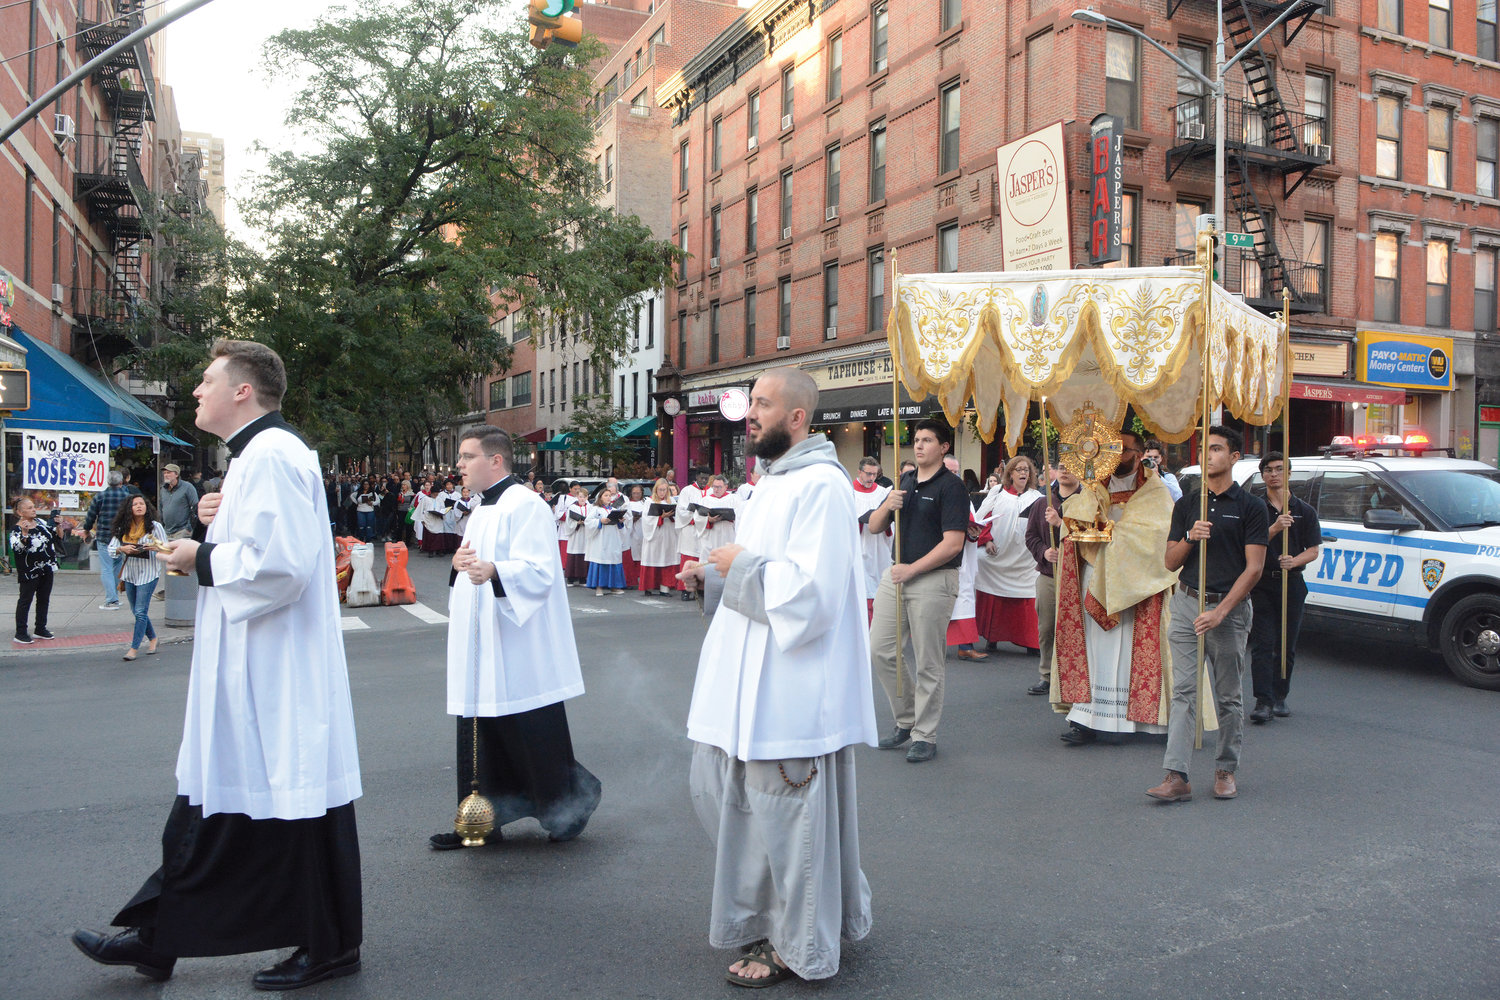 A Eucharistic Procession Through New York City is celebrated Oct. 11, beginning with Mass at Sacred Heart of Jesus Church, 457 W. 51st St., between Ninth and 10th avenues, and concluding with Exposition of the Blessed Sacrament and Benediction, led by Cardinal Dolan at St. Patrick’s Cathedral on Fifth Avenue between 50th and 51st streets. The Tuesday gathering, sponsored by the Napa Institute, commemorated the 60th anniversary of the opening of the Second Vatican Council.